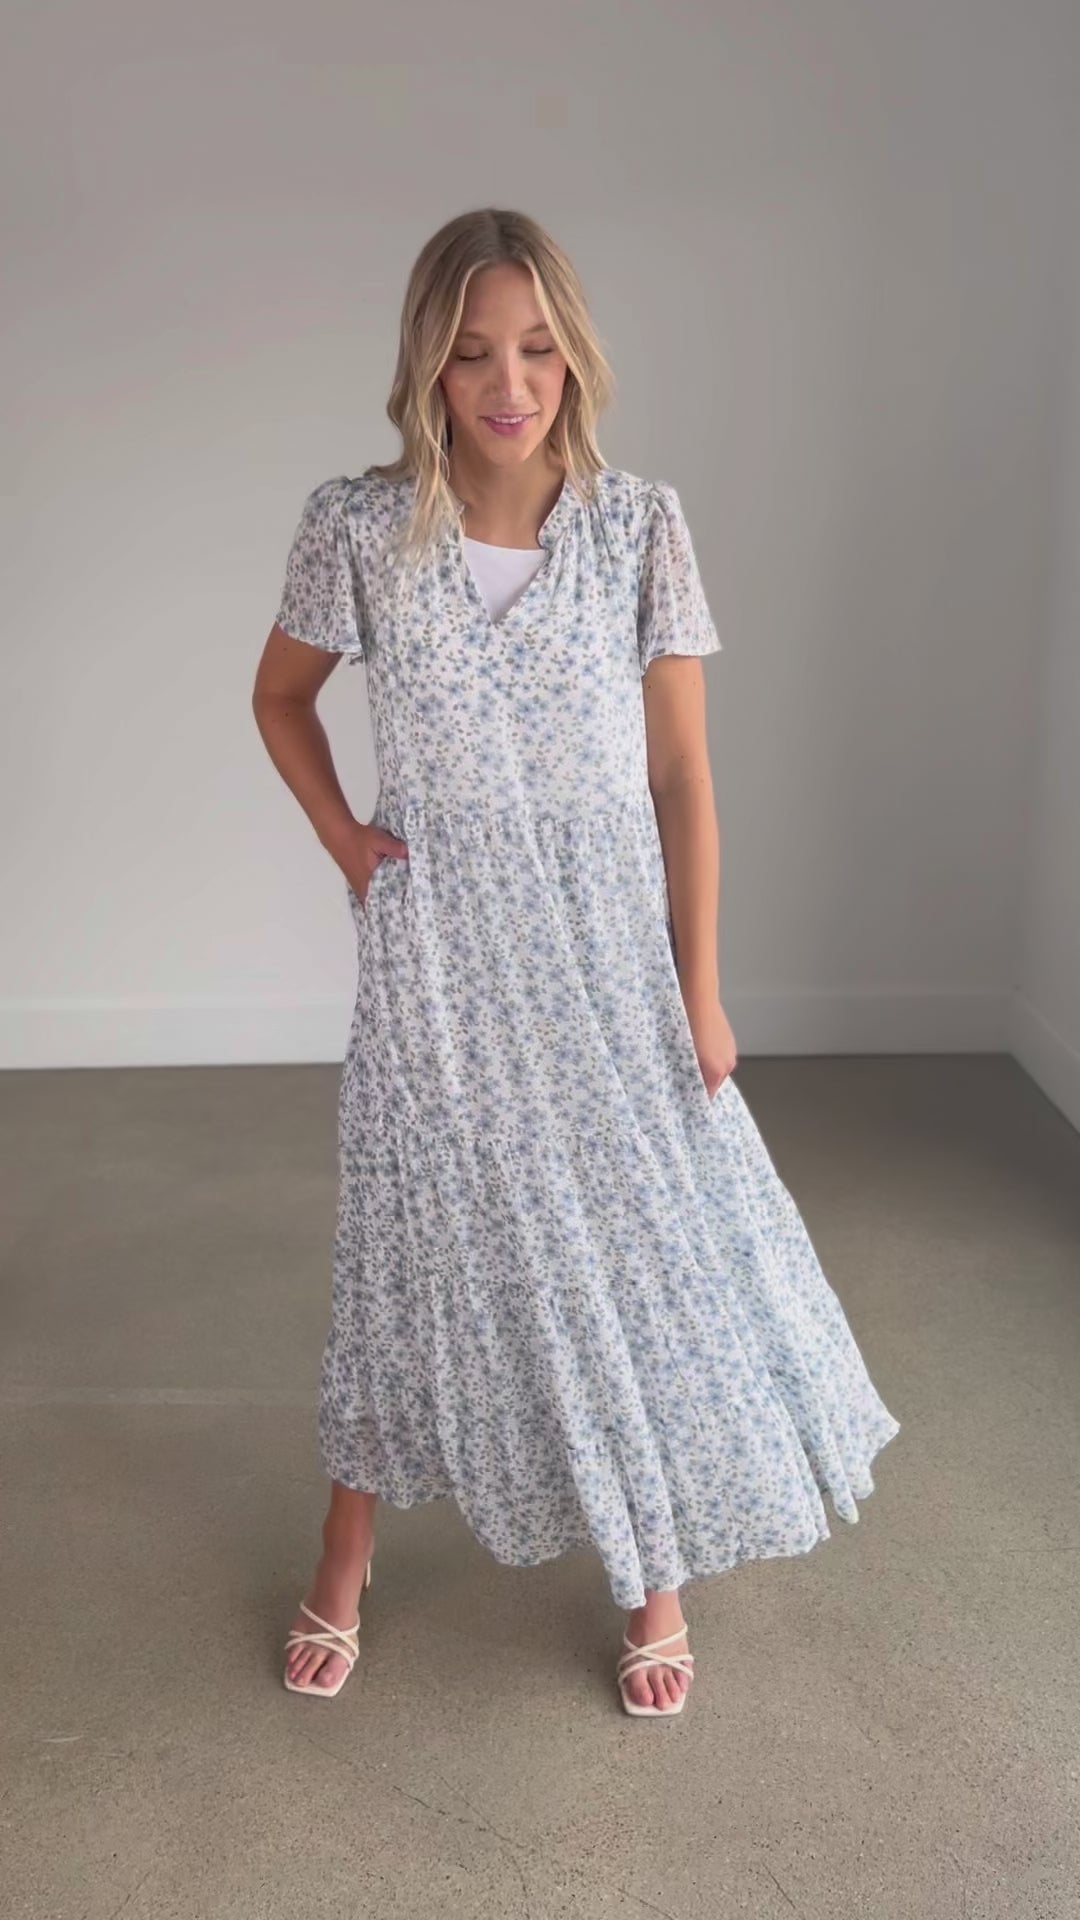 V-neck Blue Floral Maxi Dress is lined, with short sleeves, pockets, and a tiered skirt.